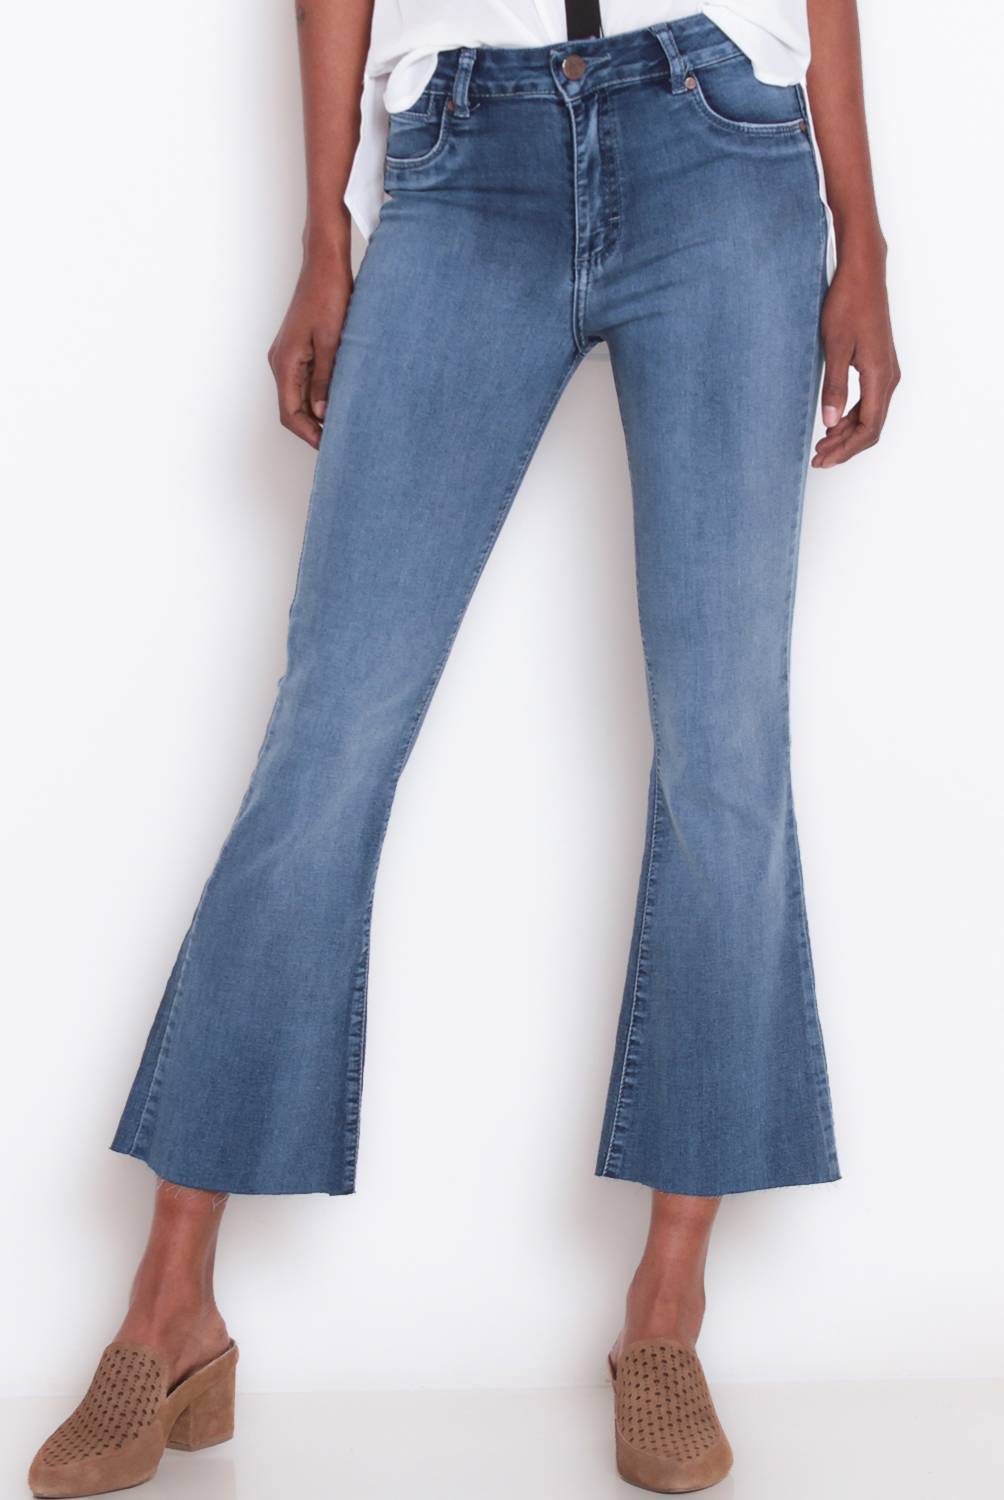 Wados - Jeans Flare